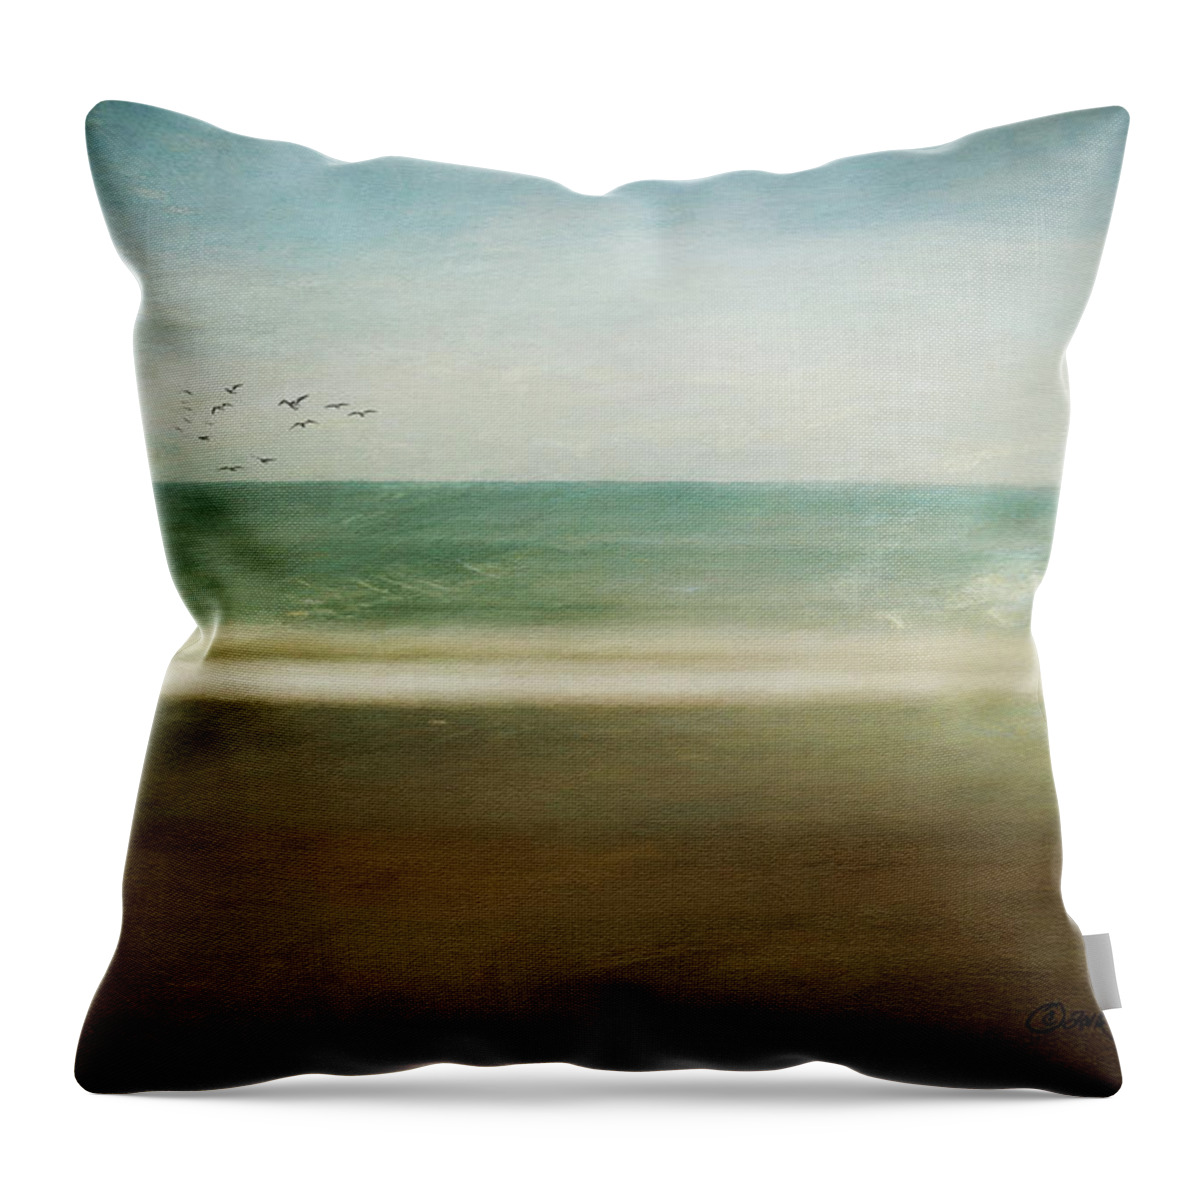 Sea Throw Pillow featuring the digital art Caress of Sea Spray by Linda Lee Hall